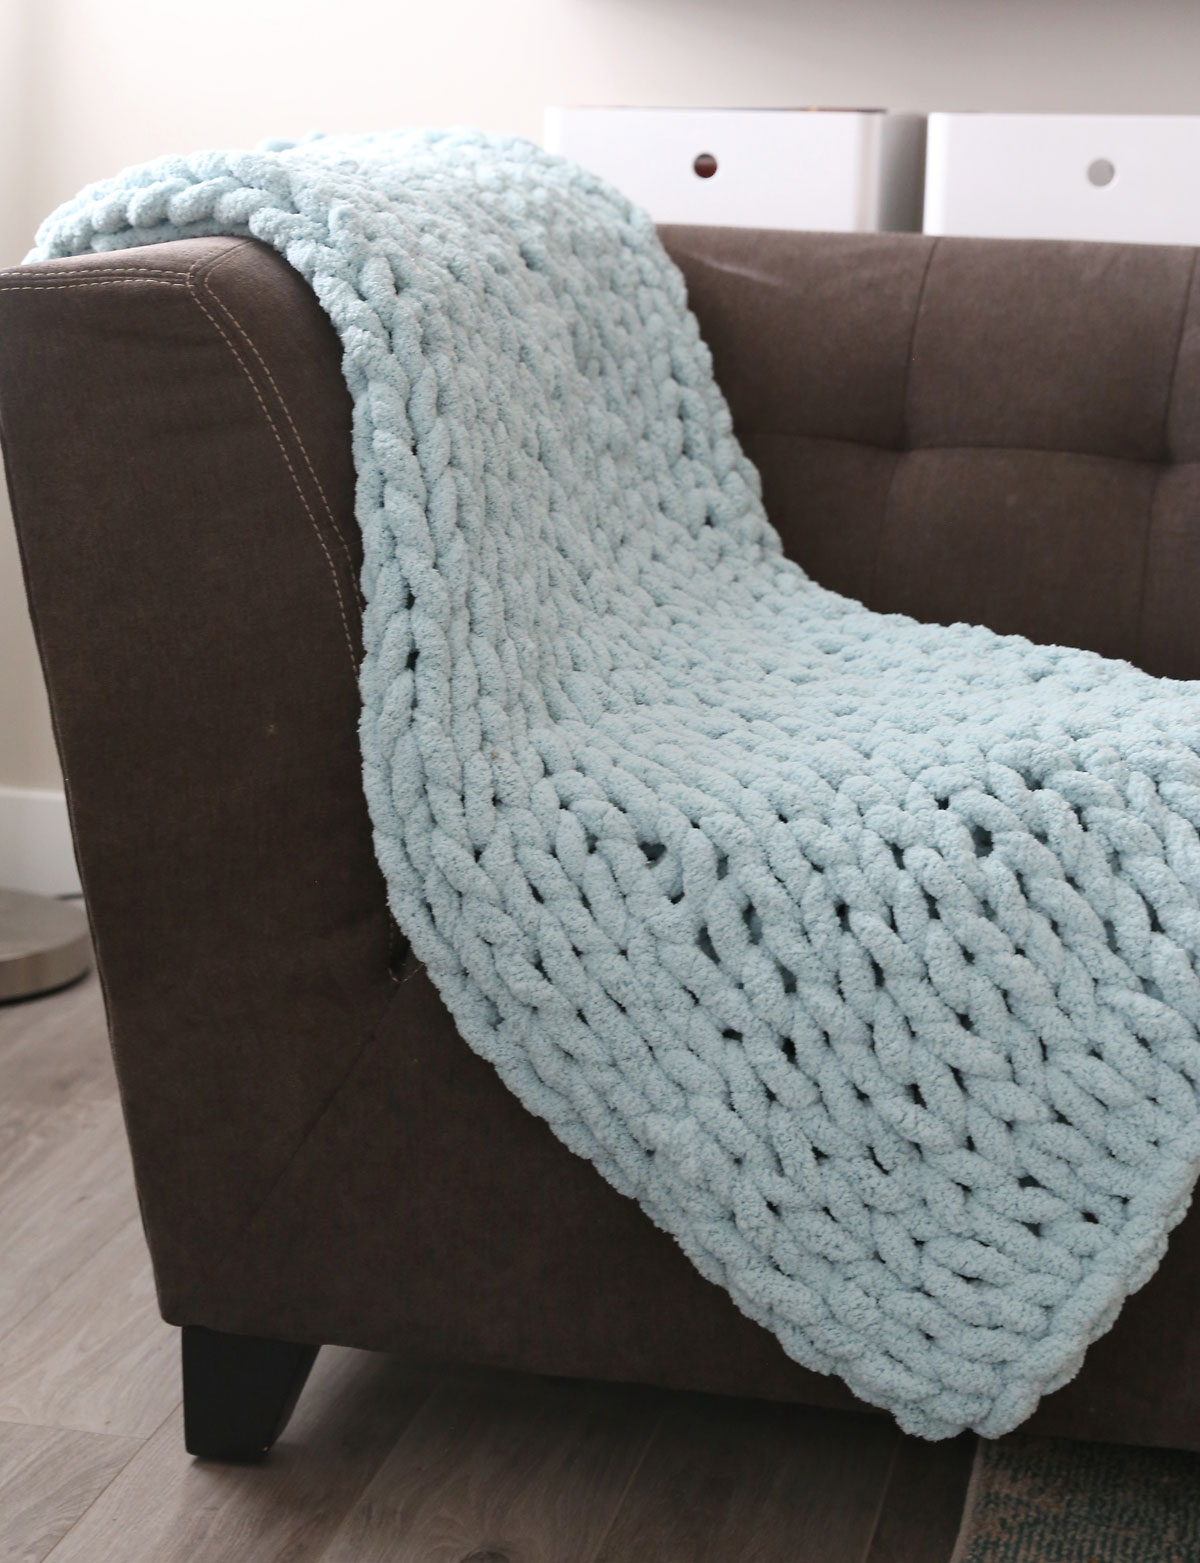 Chunky Hand Knit Blanket for Beginners - It's Always Autumn